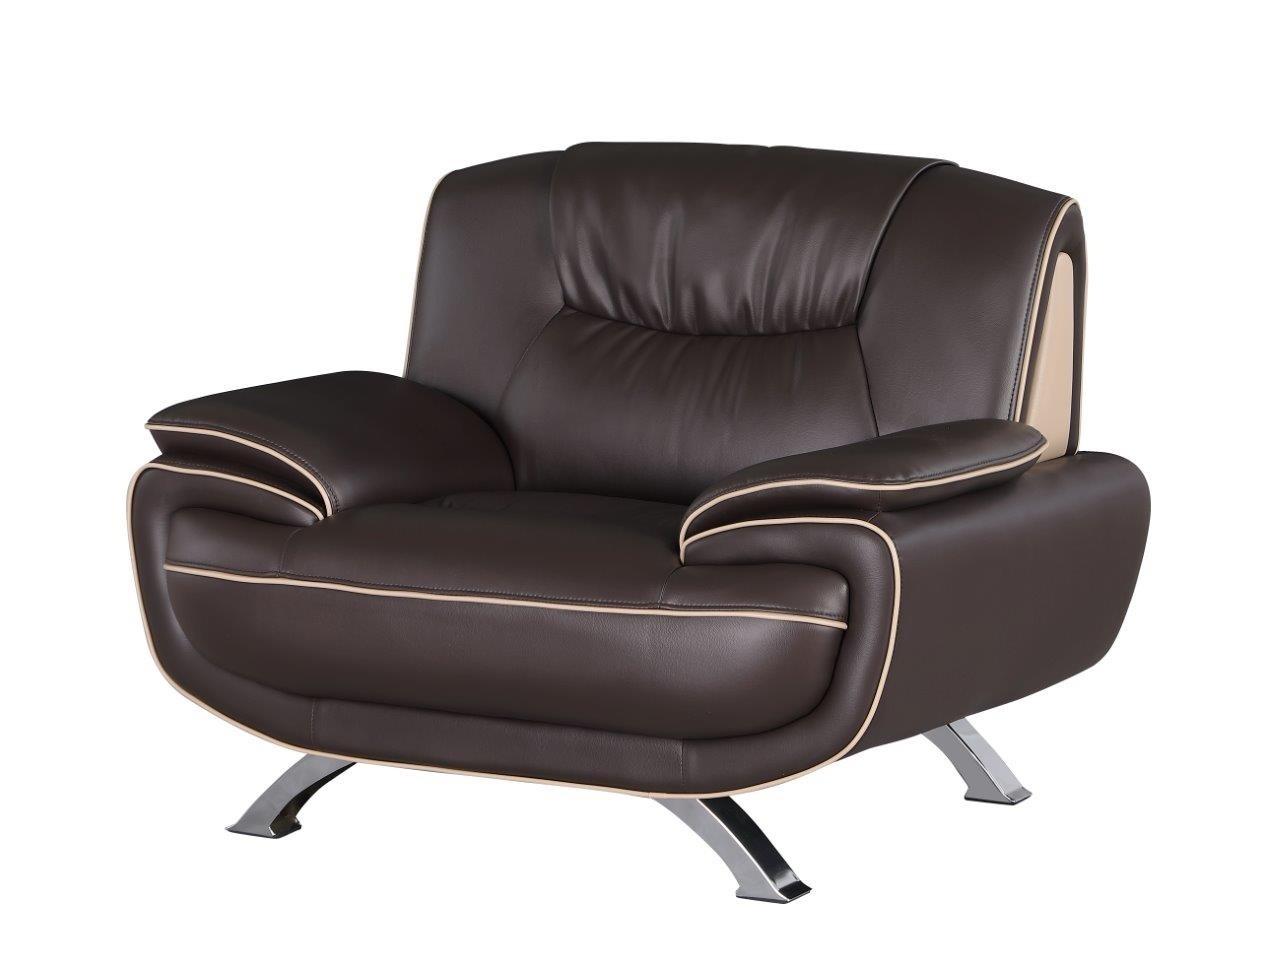 Contemporary Armchair 405 405-BROWN-CH in Brown Leather Match